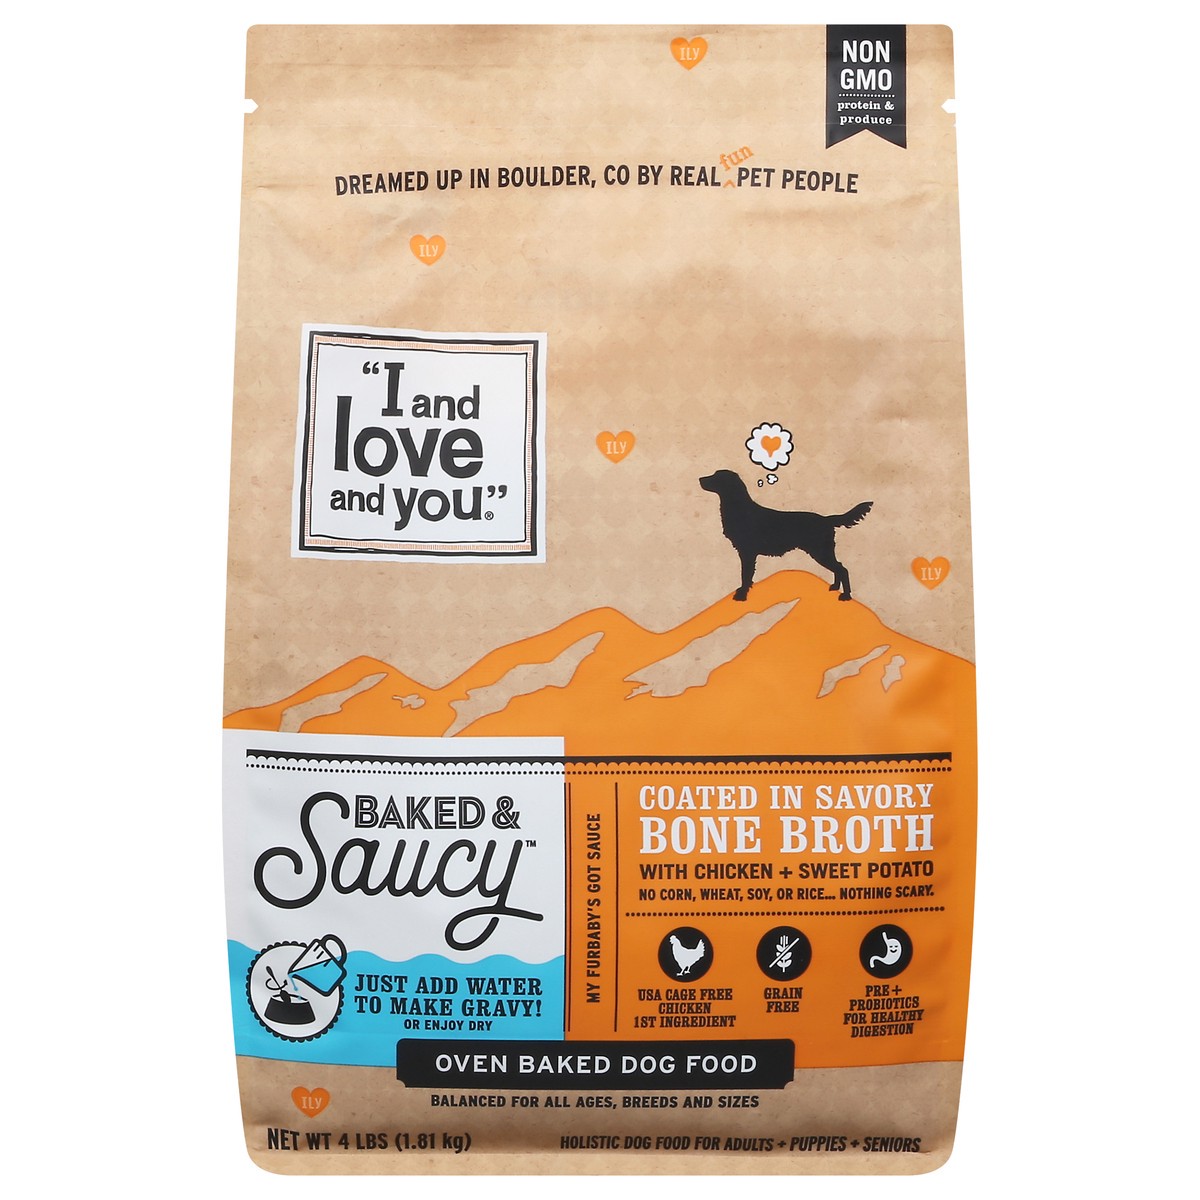 slide 1 of 15, I and Love and You Baked & Saucy Coated in Savory Bone Broth Oven Baked Dog Food 4 lb, 4 lb